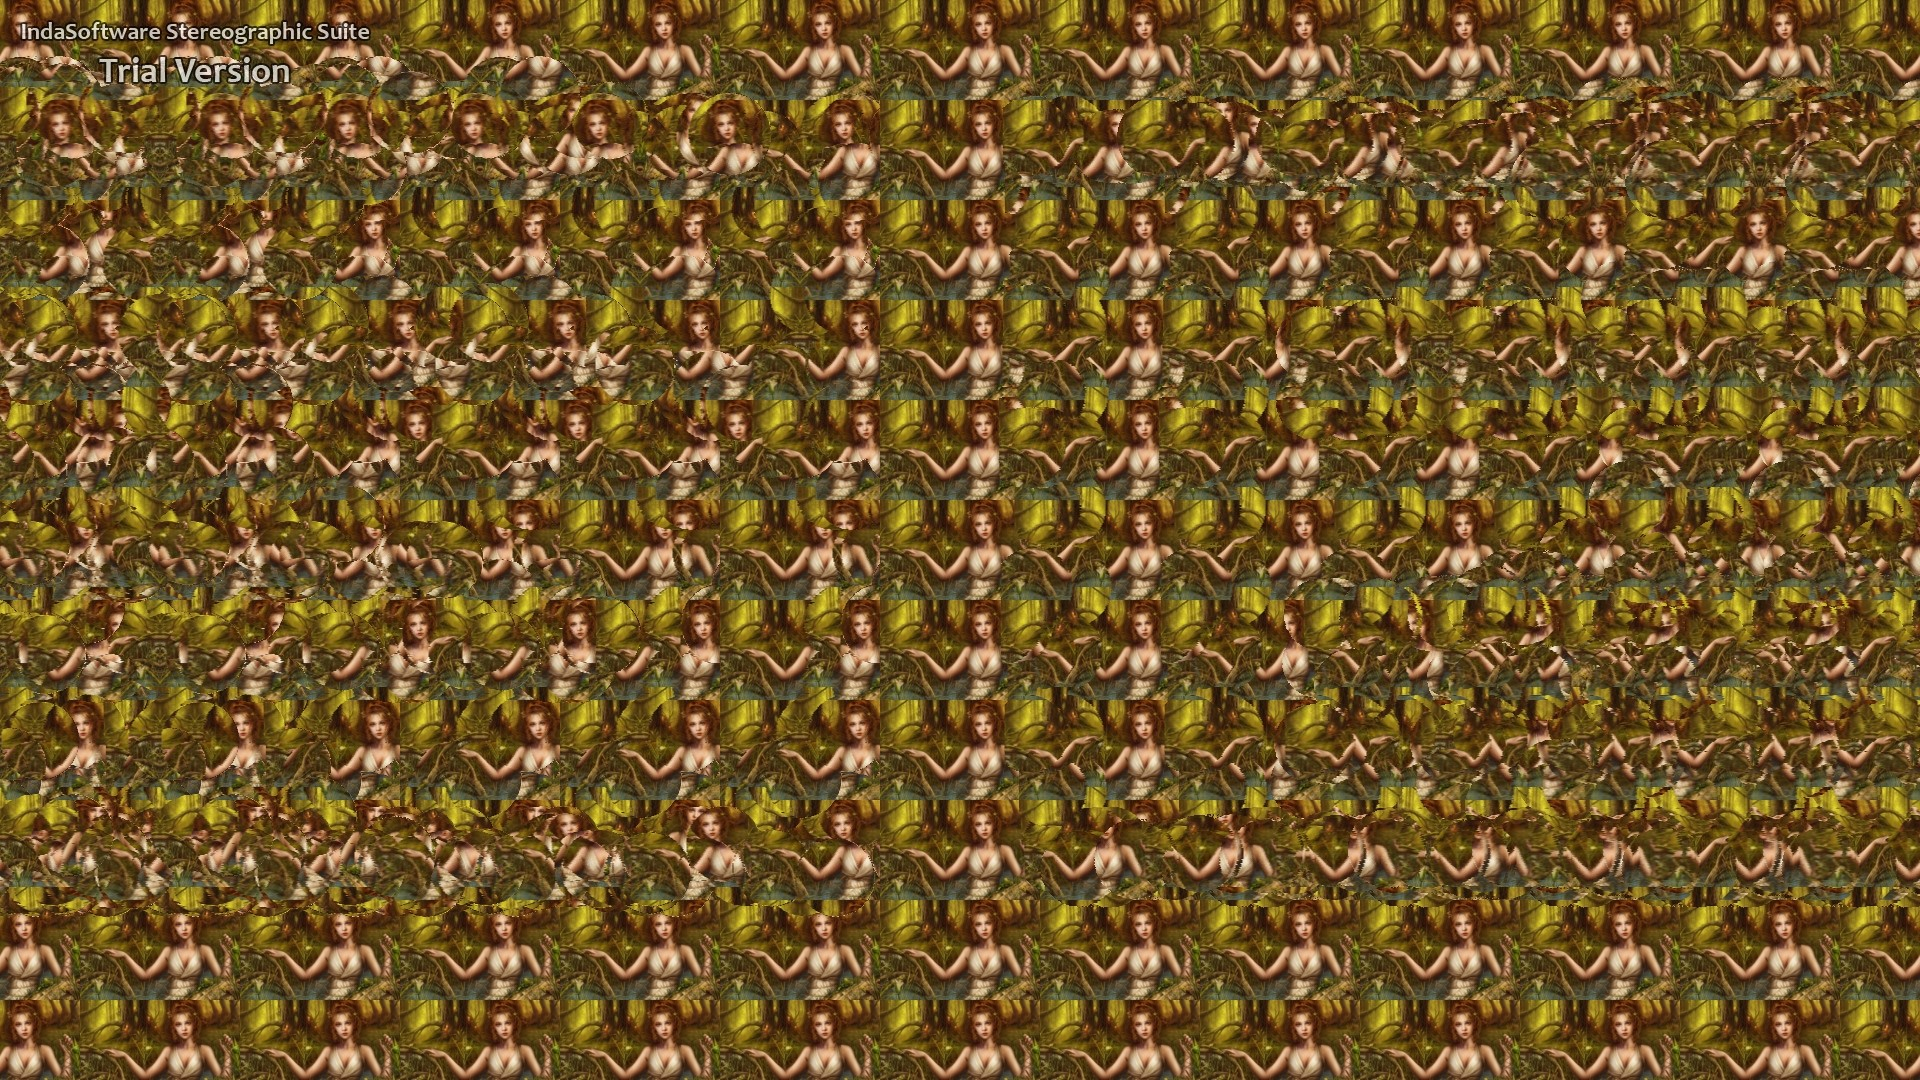 1920x1080 Animal Stereogram Wallpaper posted by Christopher Peltier